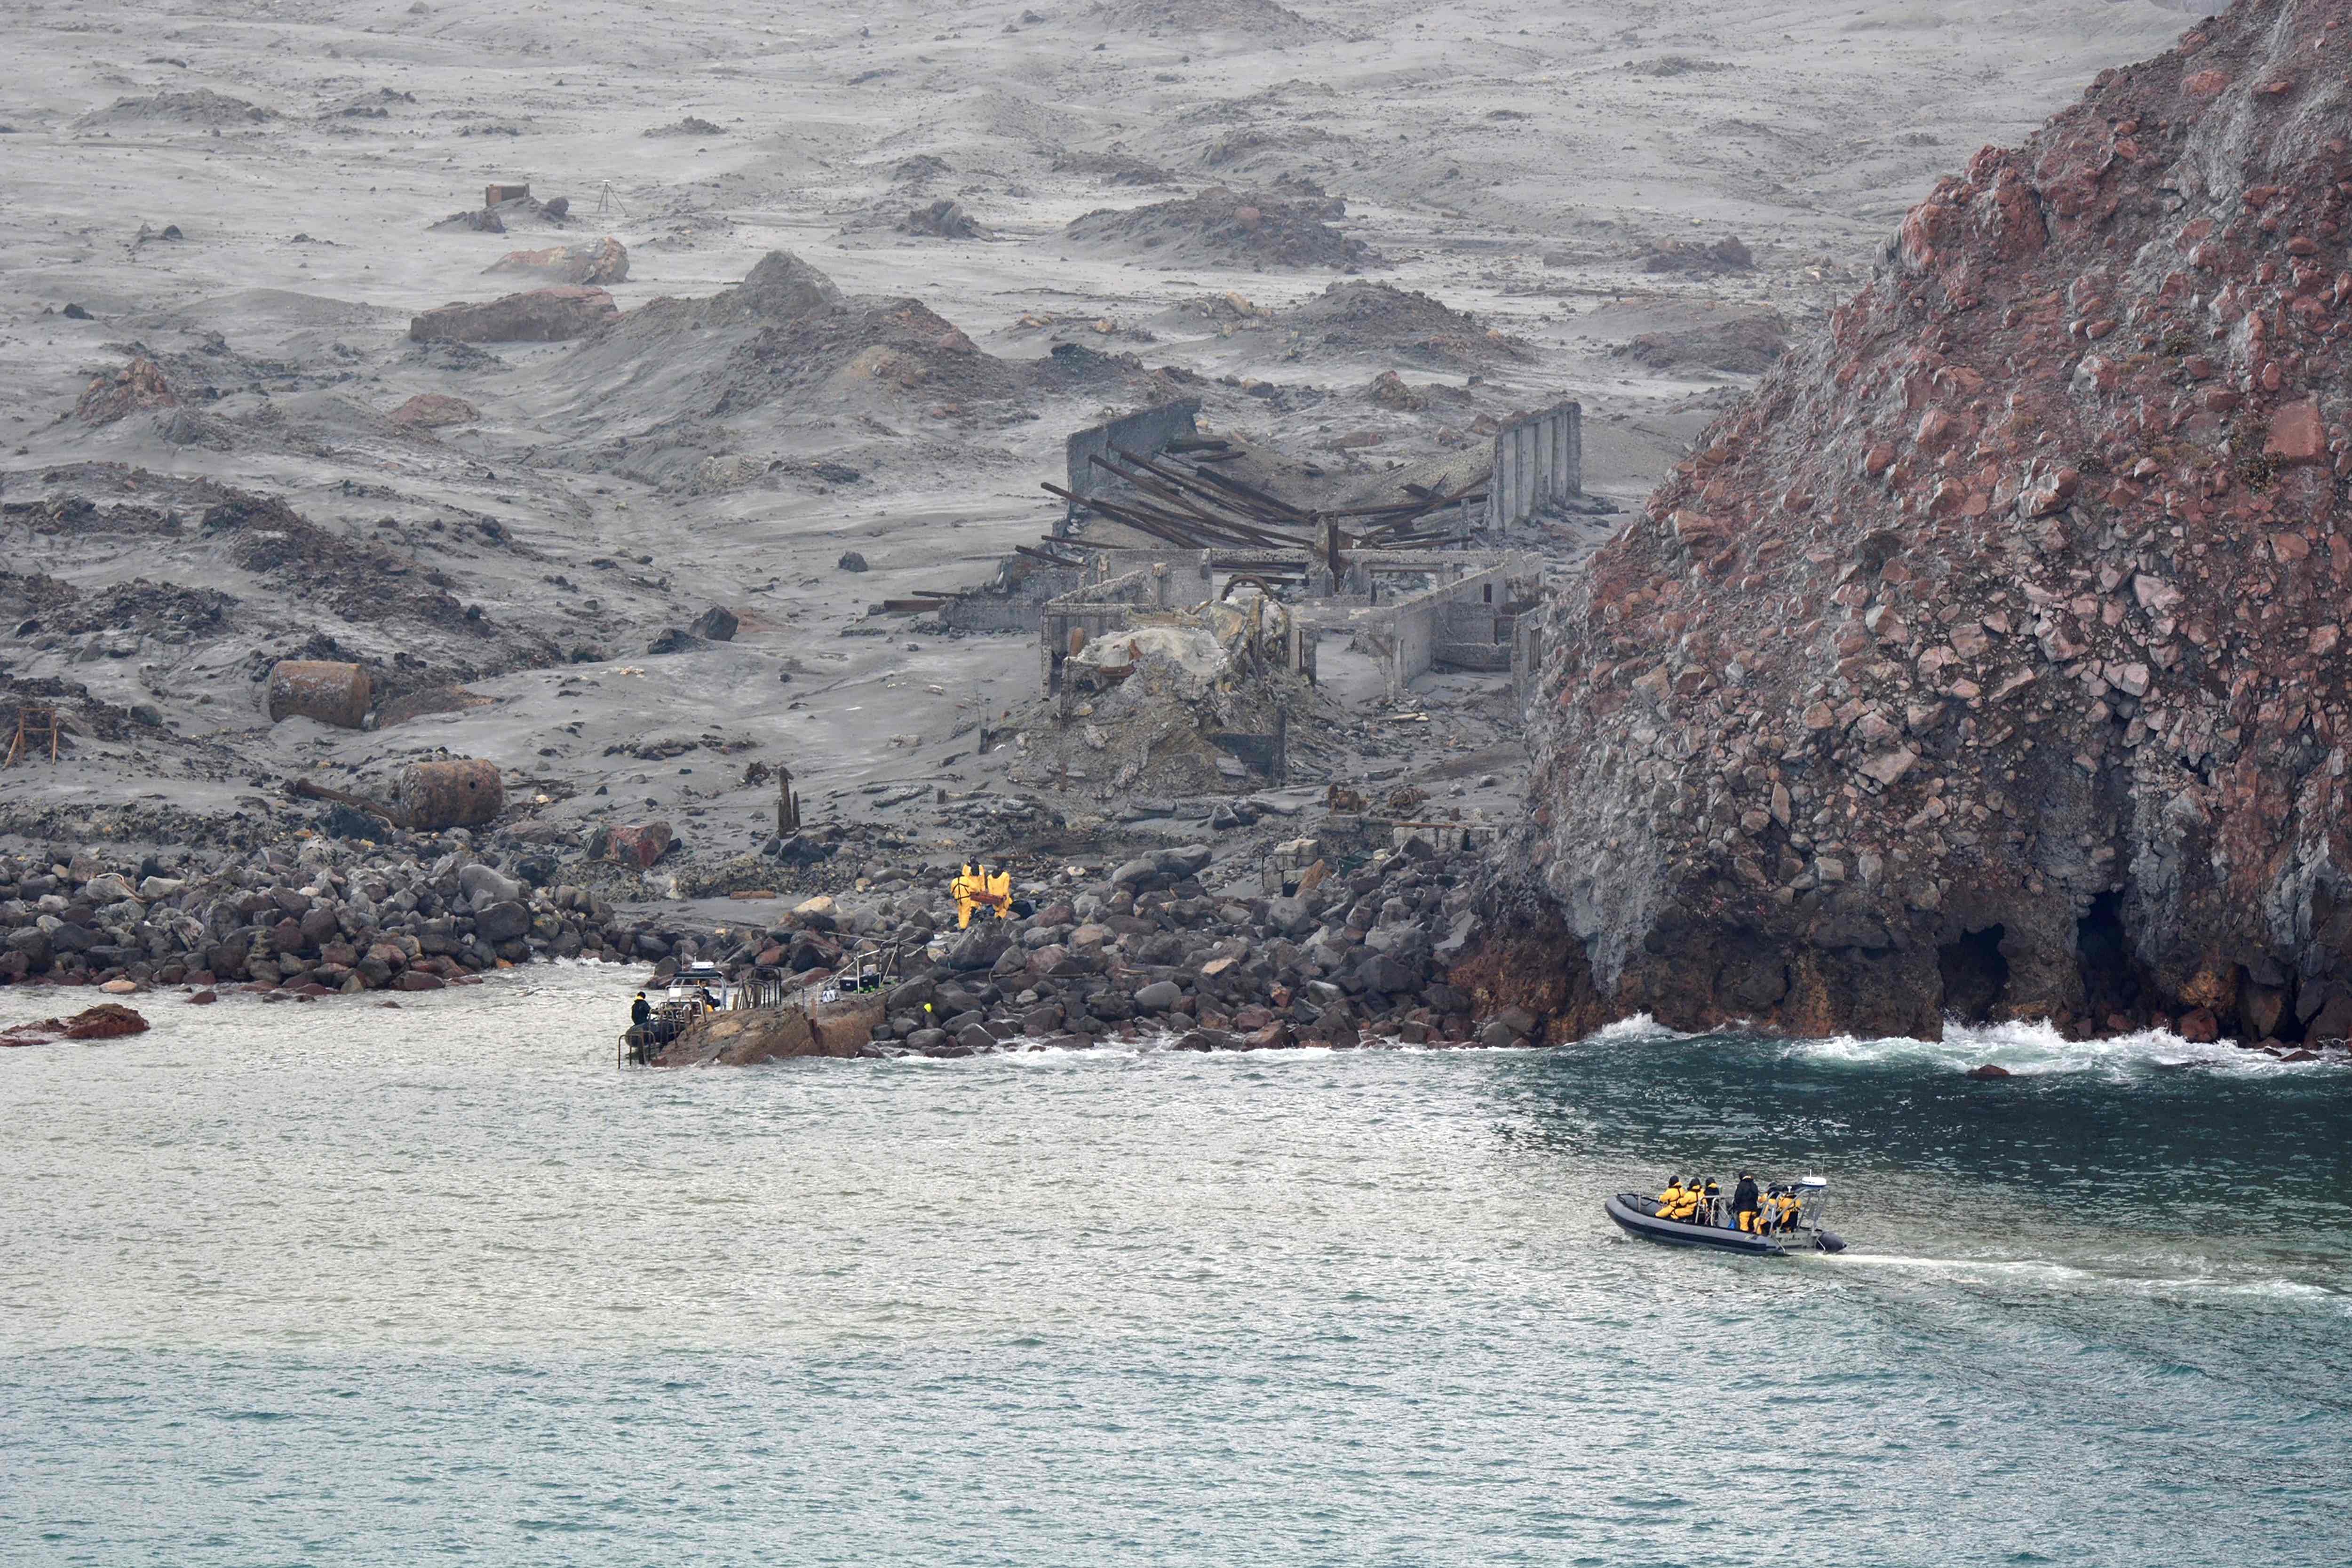 New Zealand Defence Force shows elite soldiers taking part in a mission to retrieve bodies from White Island after the December 9 volcanic eruption, off the coast from Whakatane on the North Island. (AFP Photo)